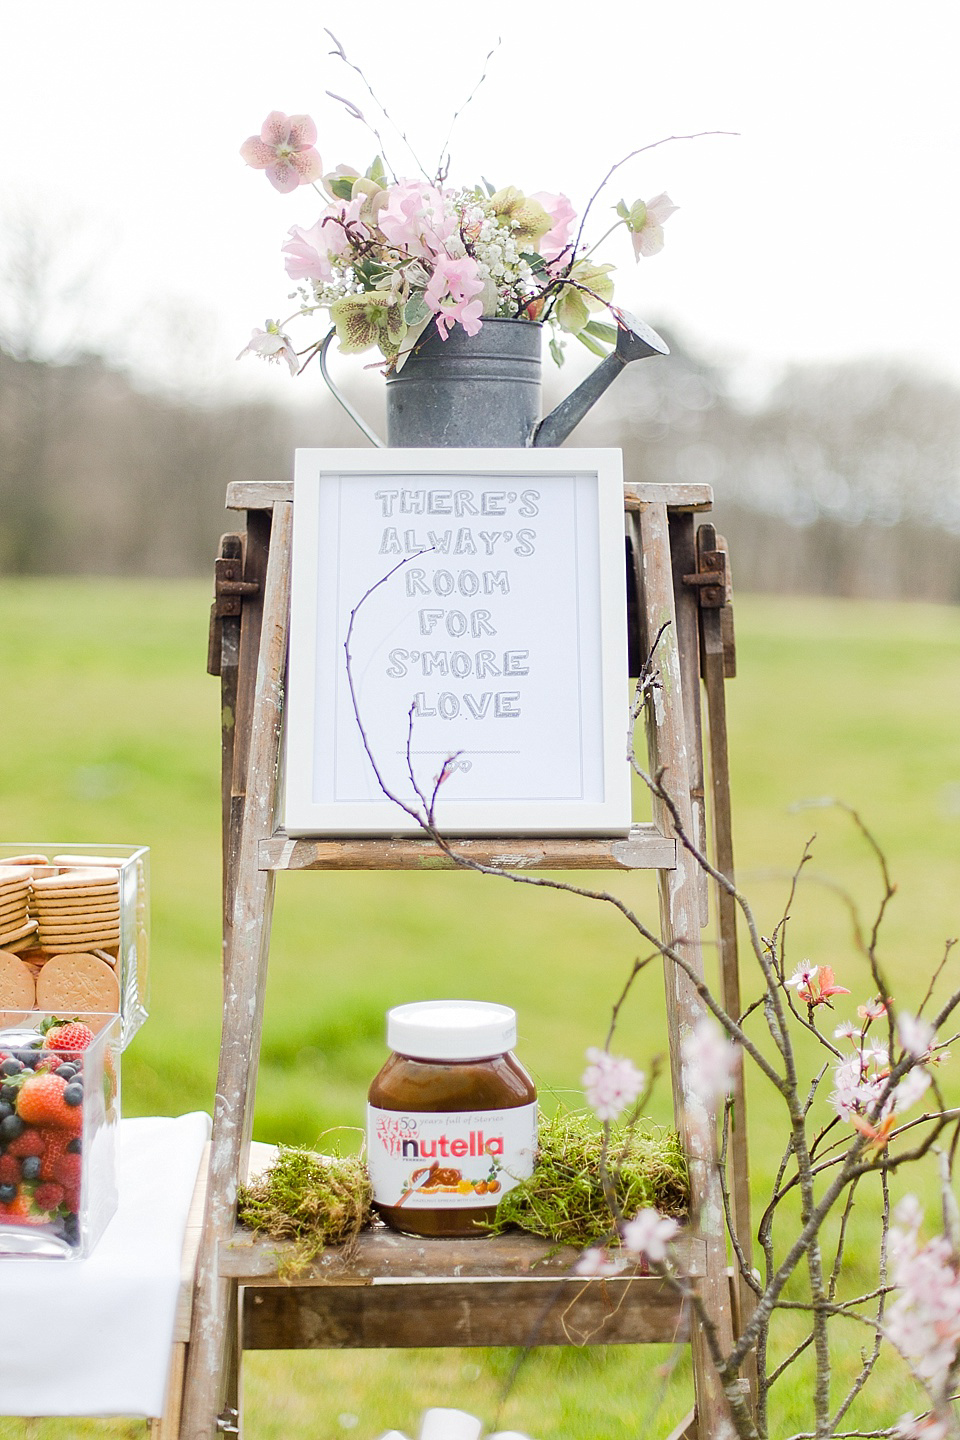 Wedding Catering Ideas - The Street Stalls Collection by Kalm Kitchen